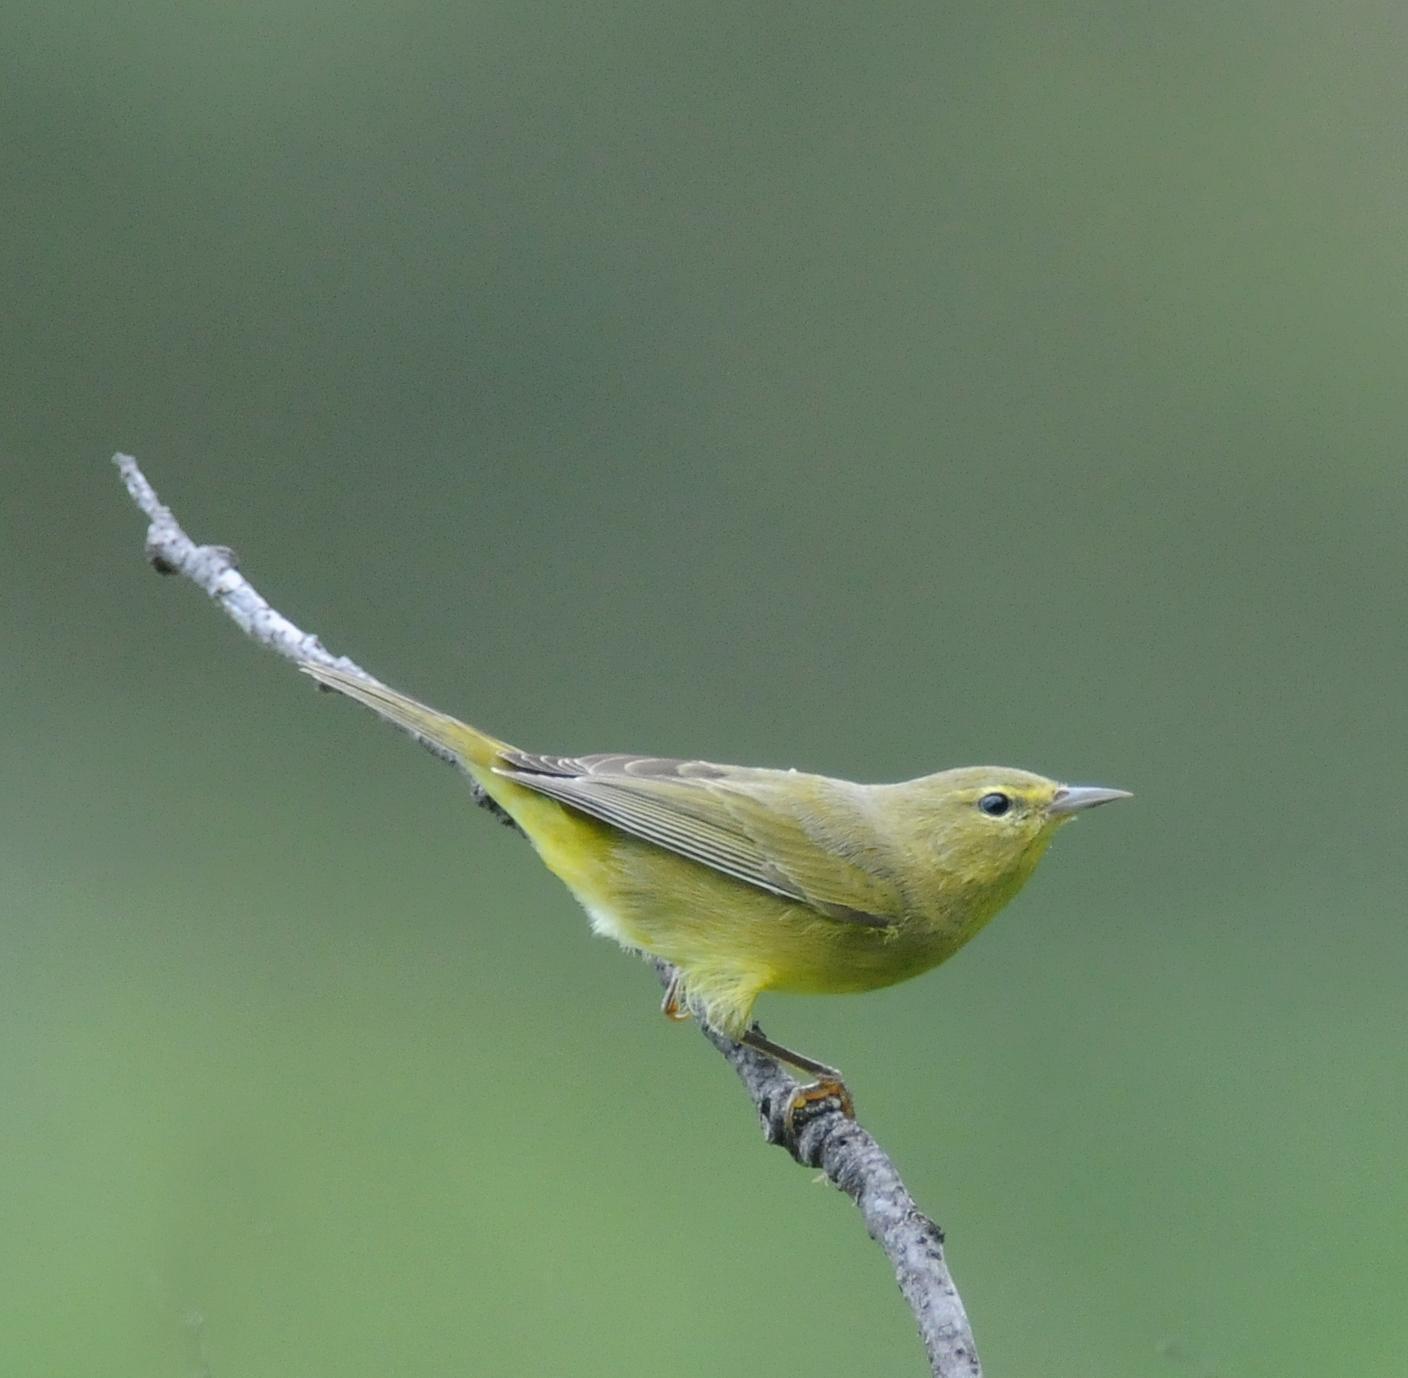 Orange-crowned Warbler Photo by Steven Mlodinow